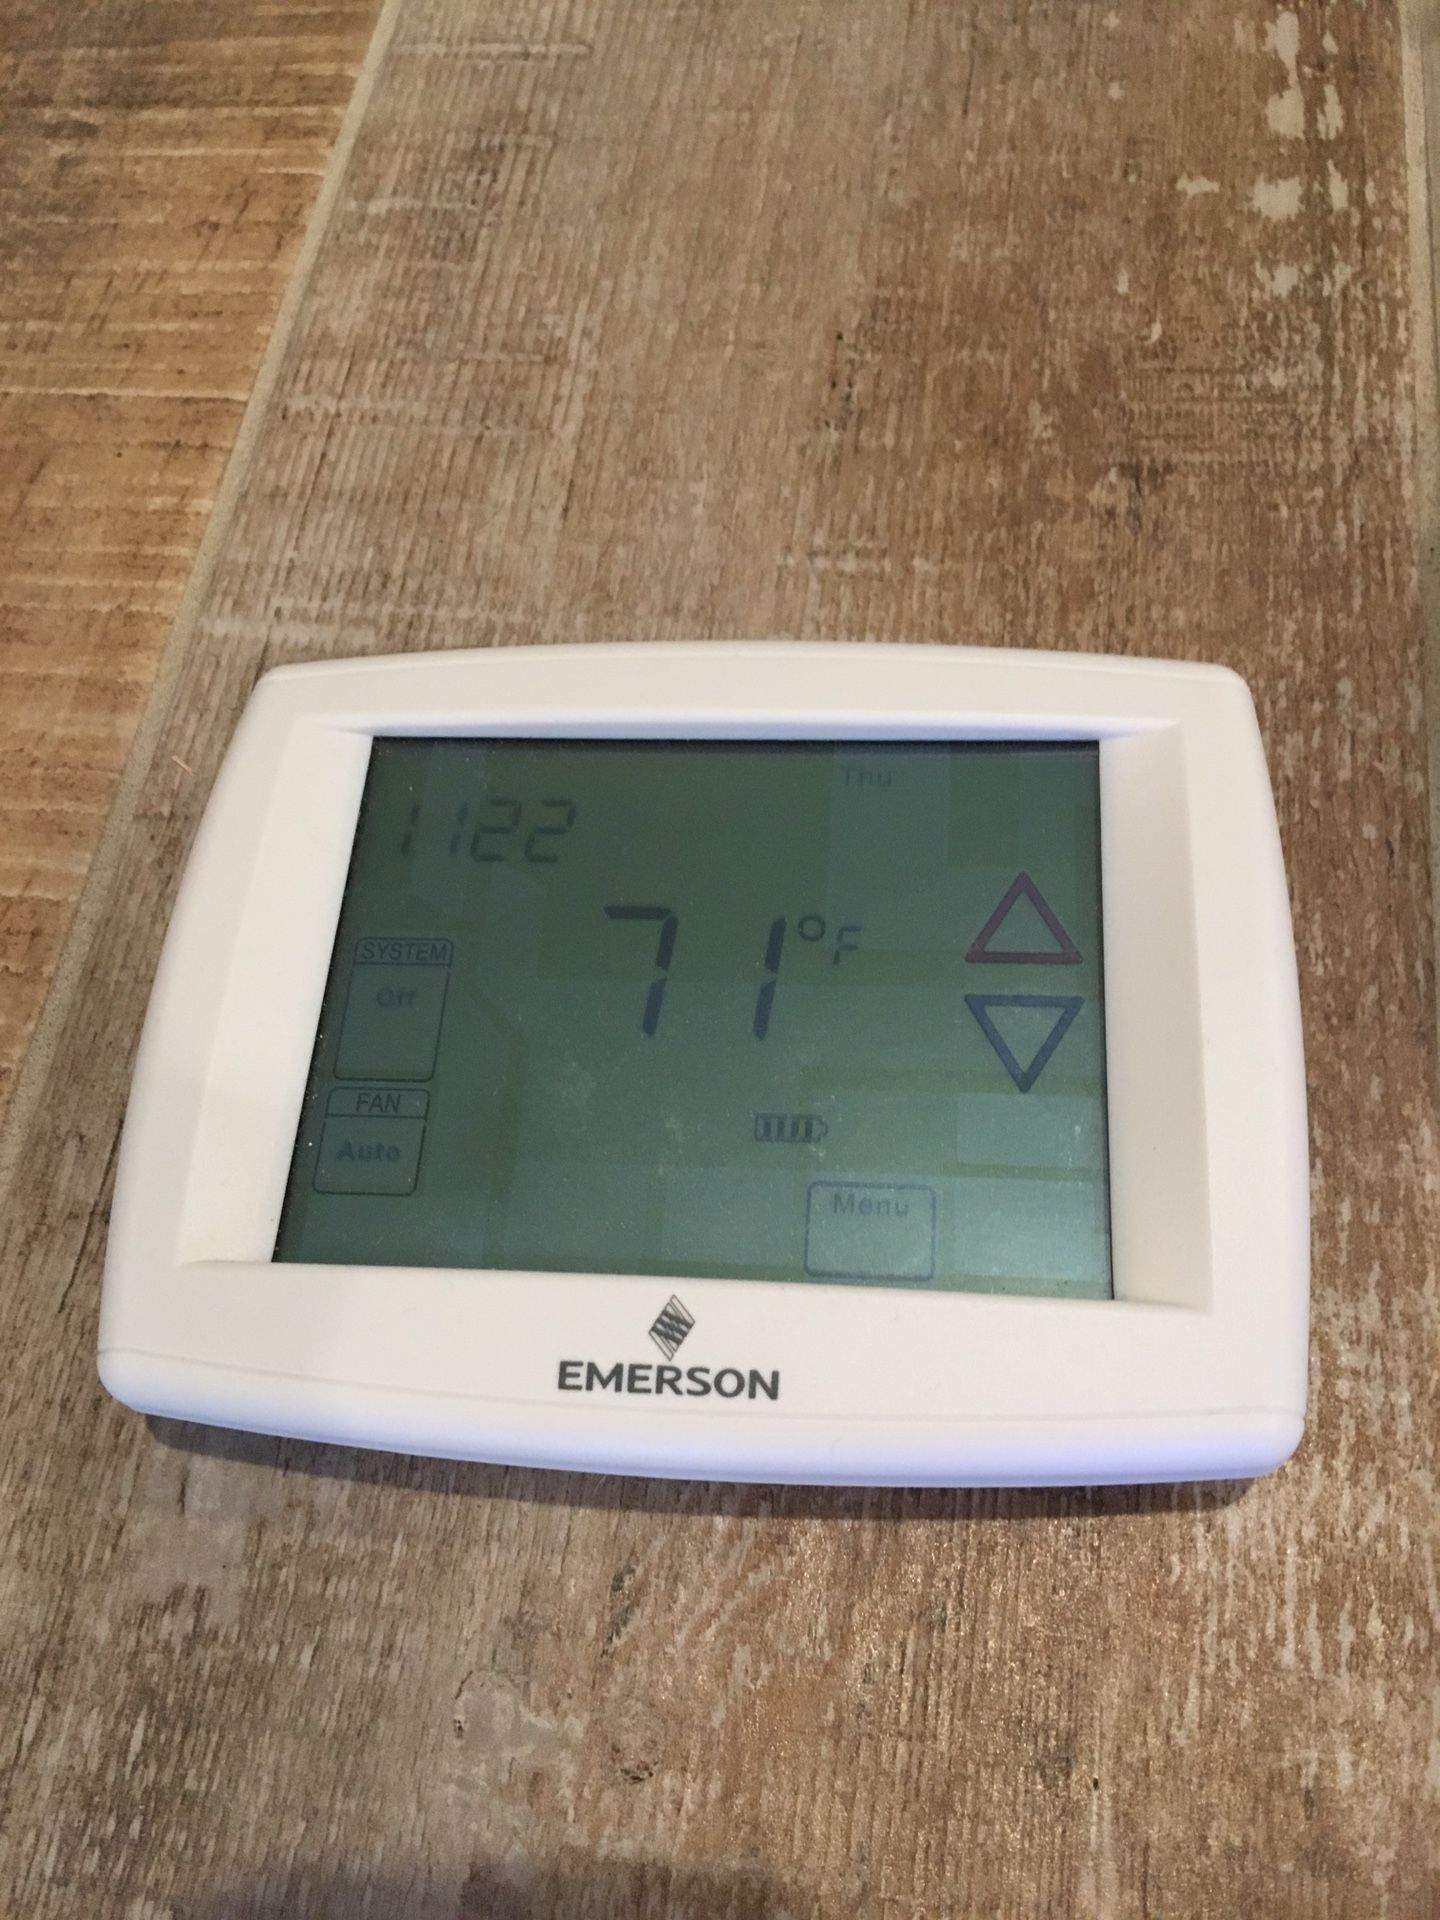 Emerson Programable thermostats